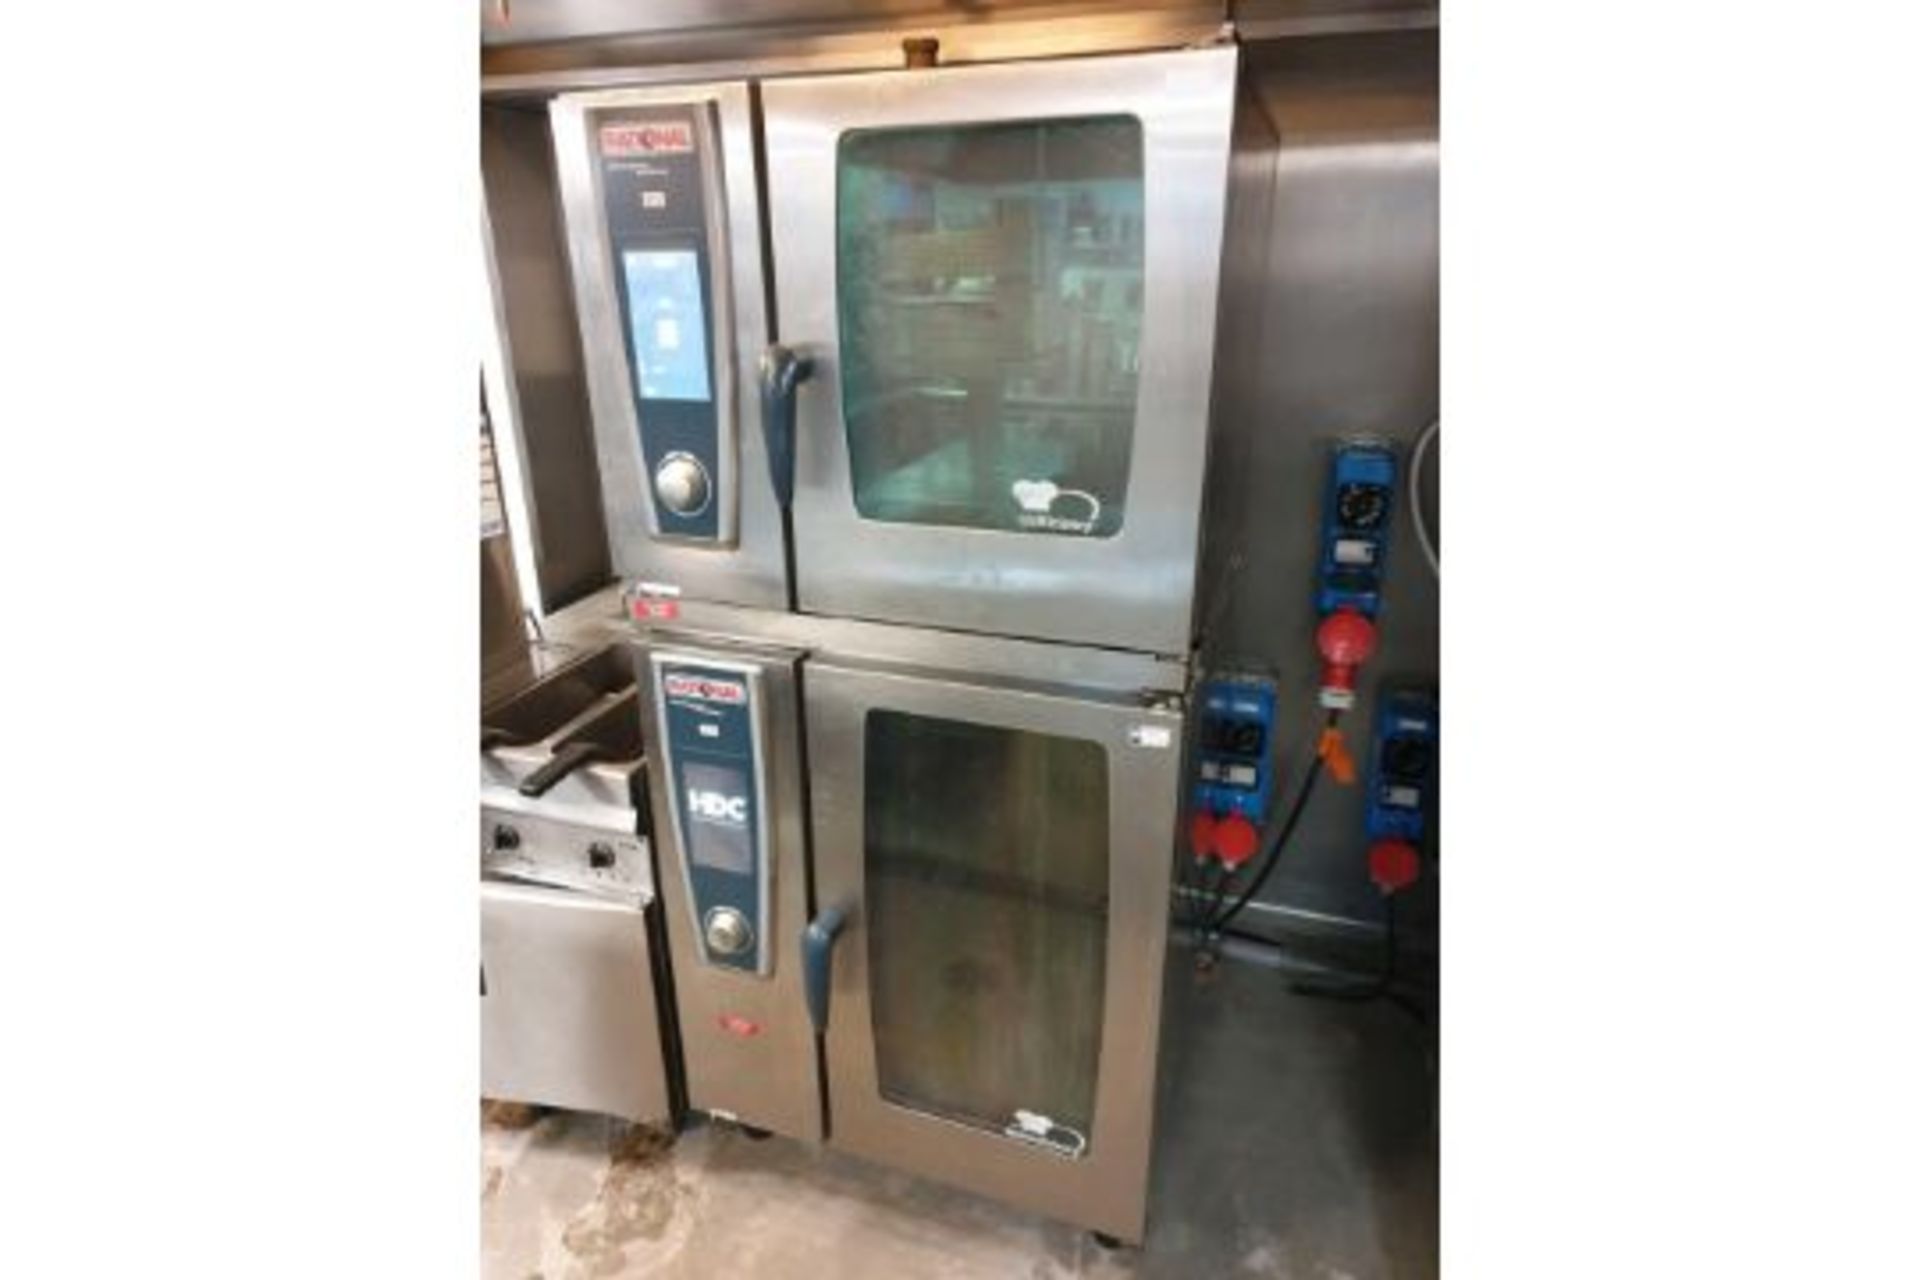 Rational White Efficiency Dual SCCWE61 / SCCWE101 3 Phase Electric Self Cooking Center / Combination - Image 2 of 2